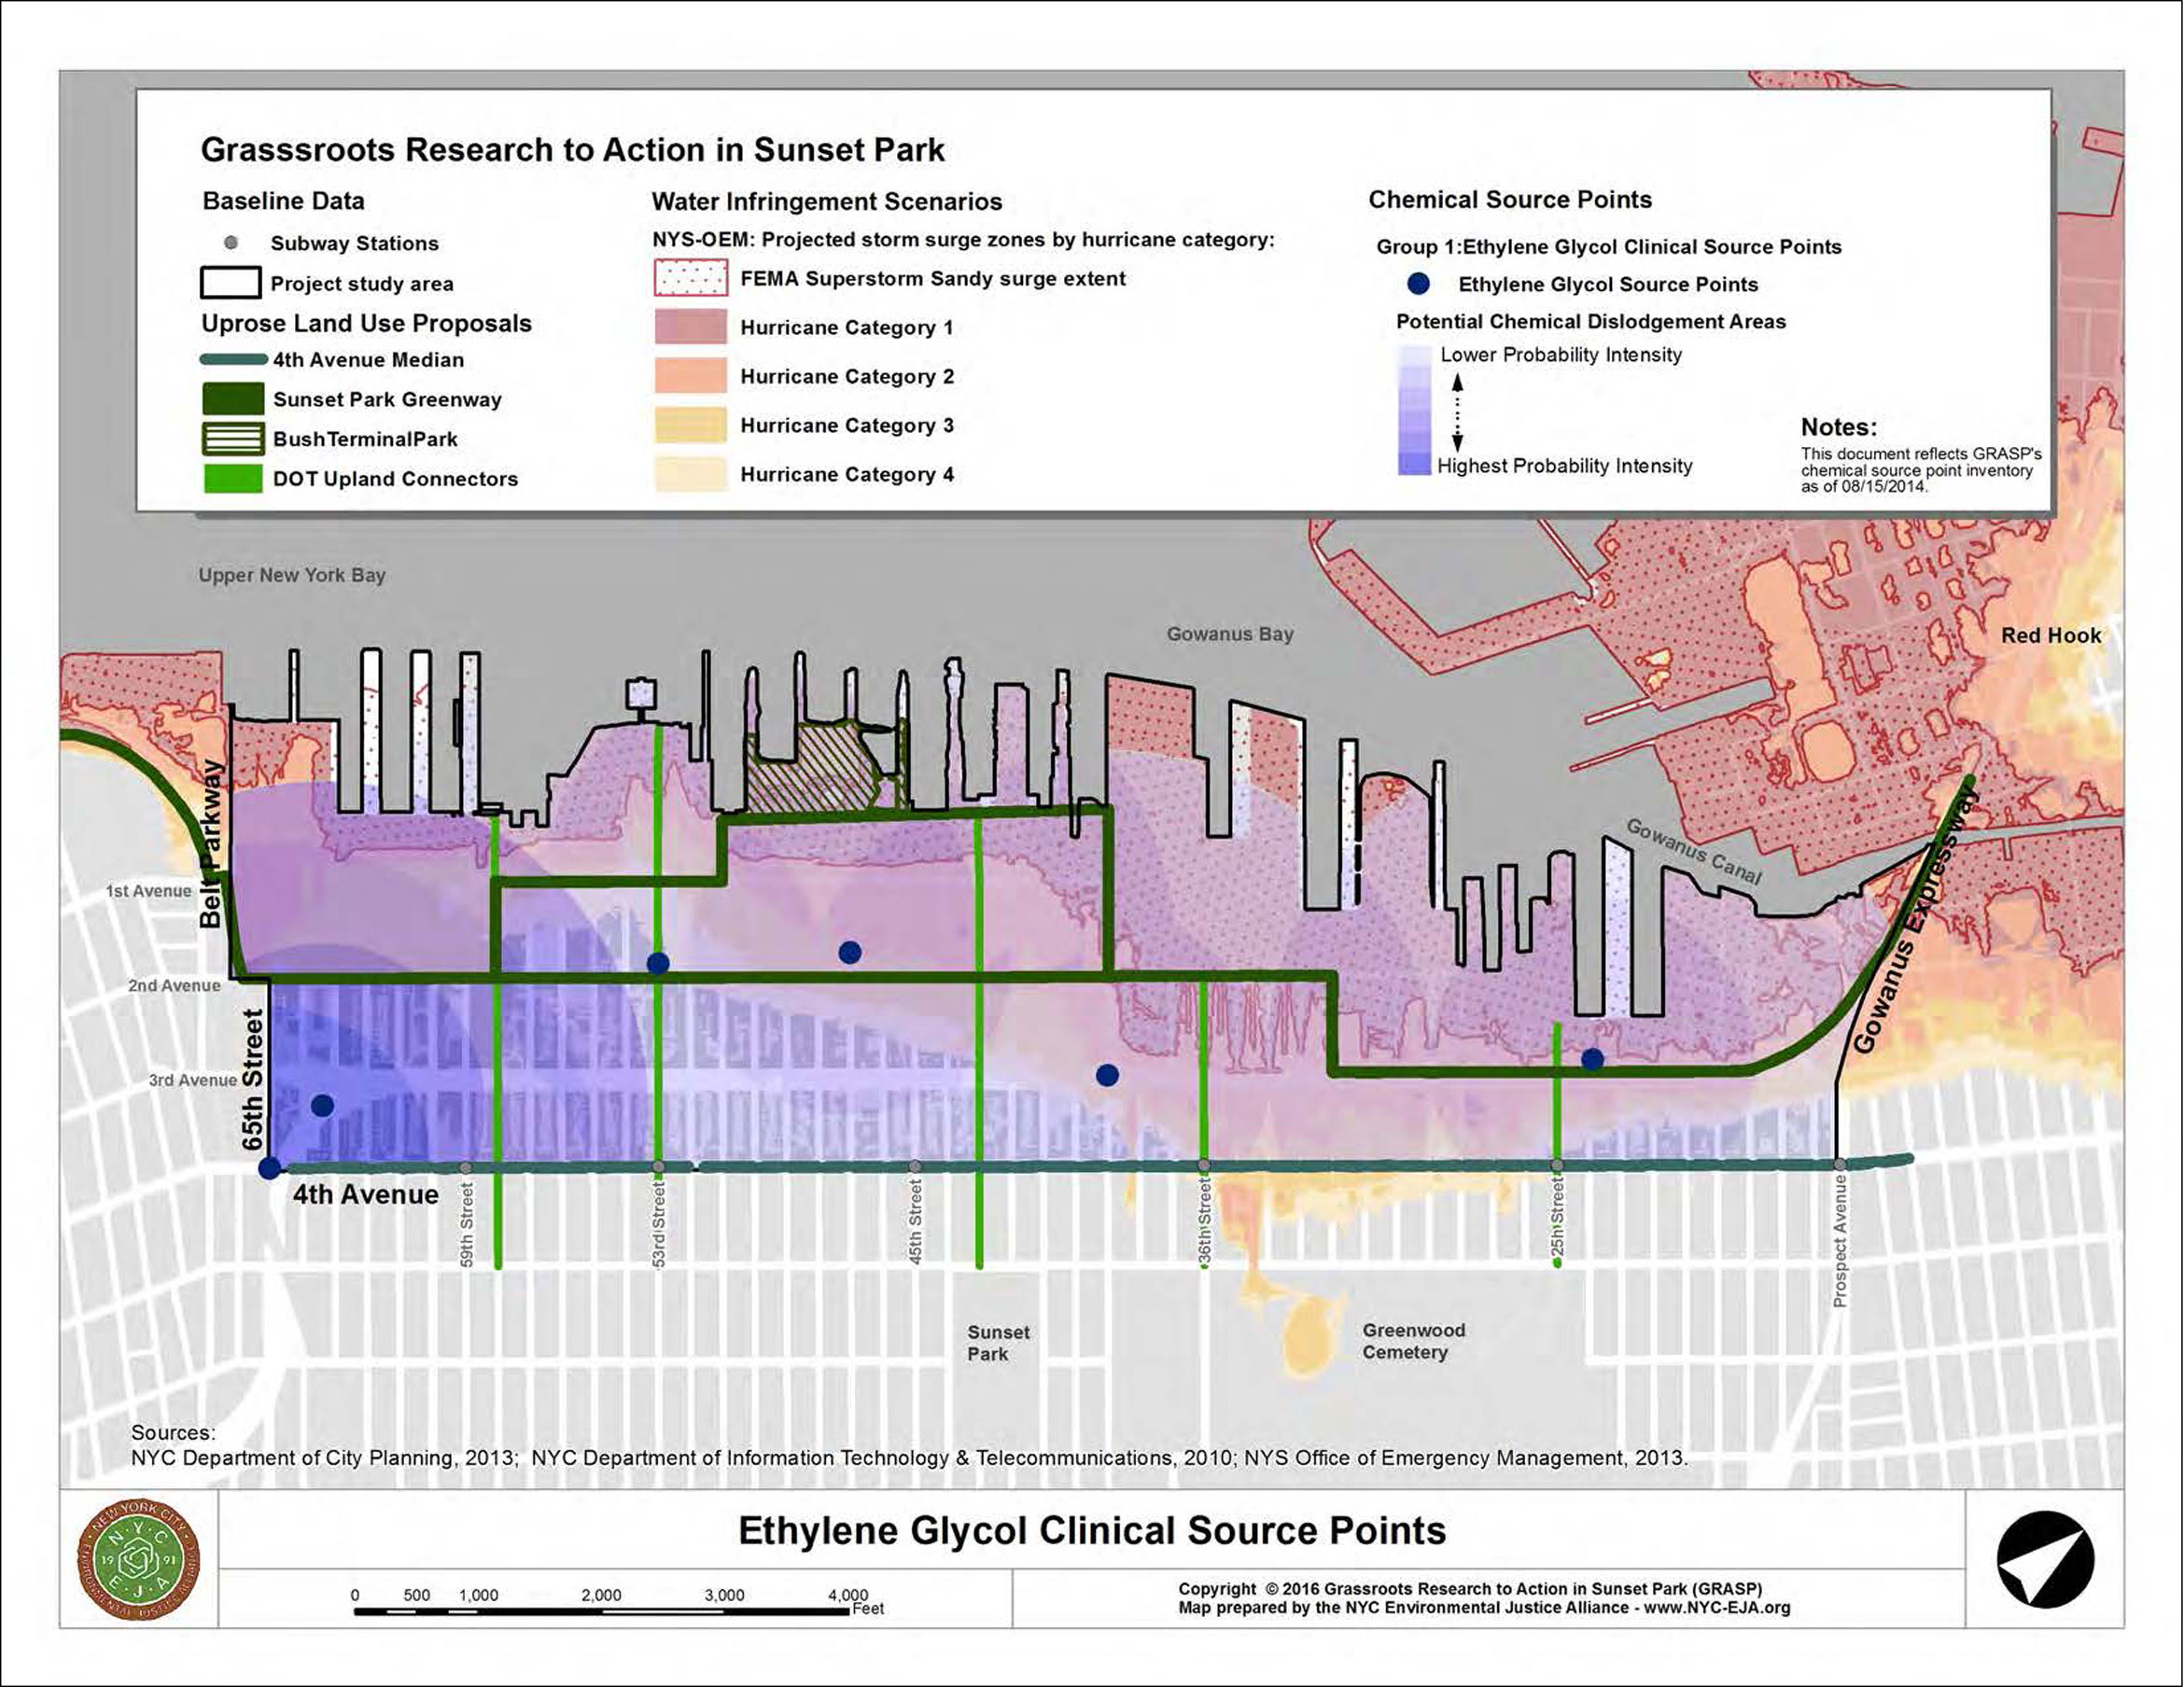 The New York City Environmental Justice Alliance mapped the concentration of certain toxic substances in Sunset Park. Ethylene glycol is a type of automobile engine coolant. The risk of these chemicals spreading during a flooding event is of particular concern to industrial waterfront communities like Sunset Park. Map by the New York Environmental Justice Alliance